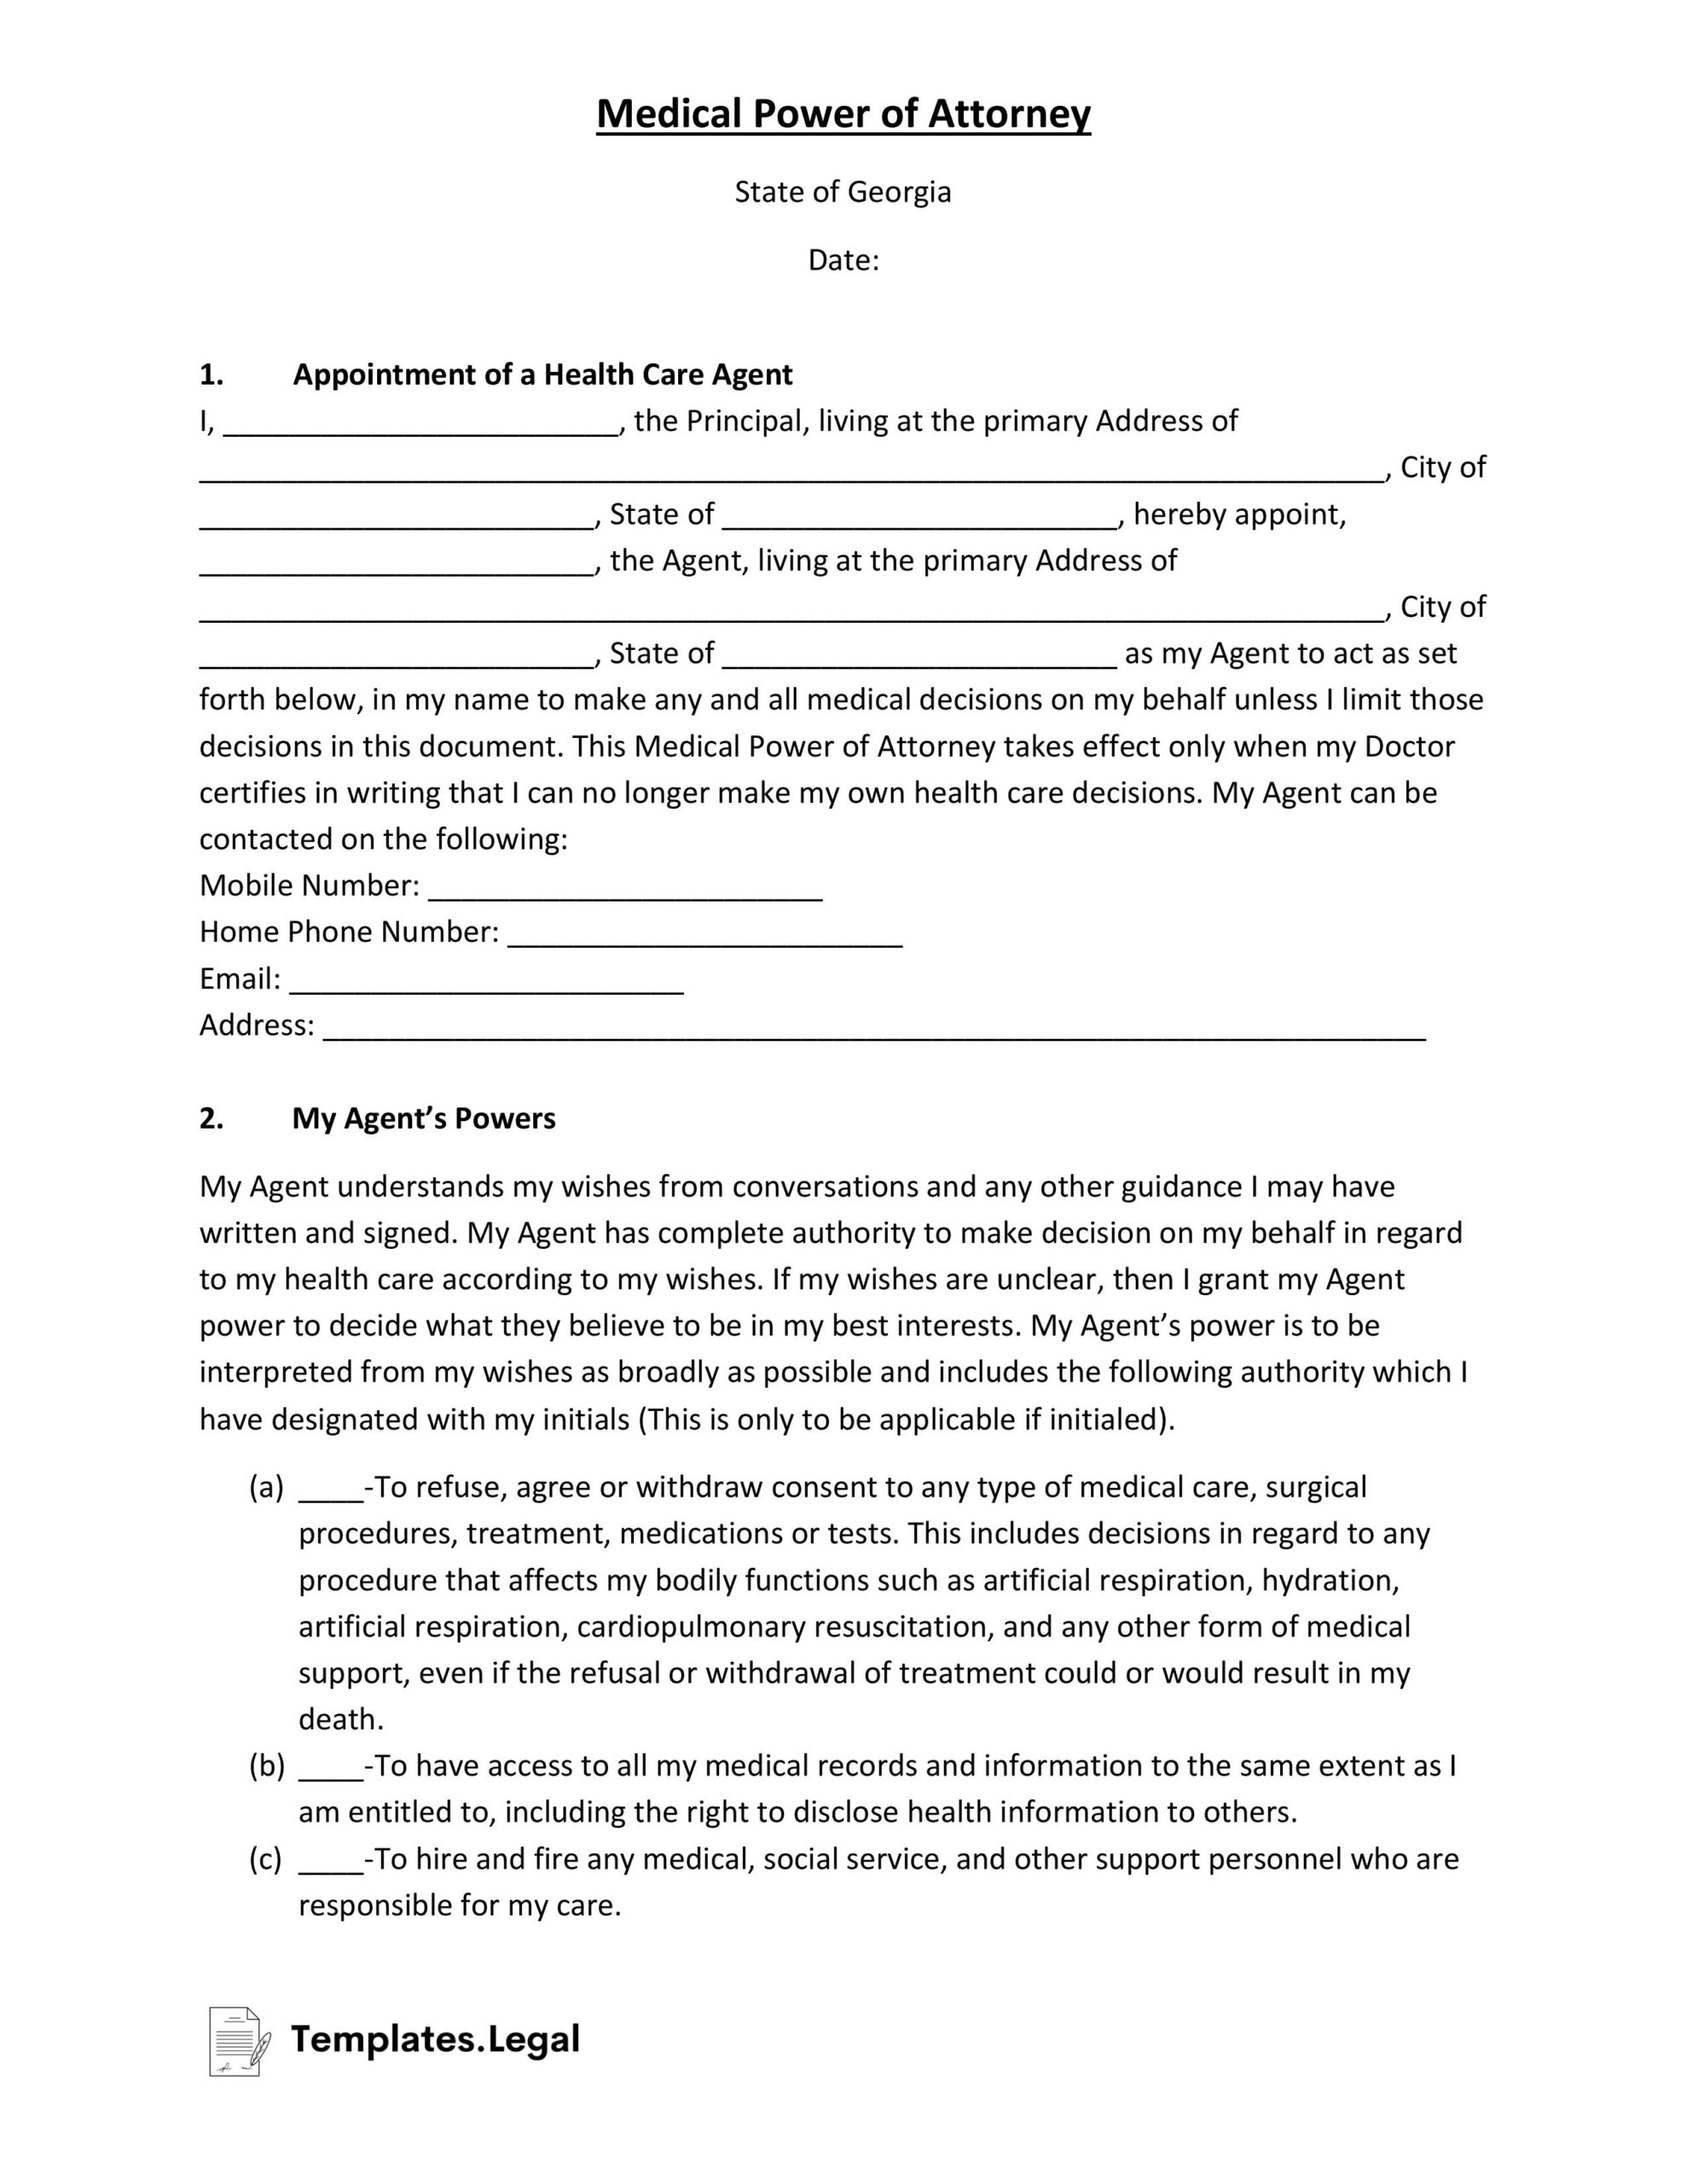 Georgia Medical Power of Attorney- Templates.Legal